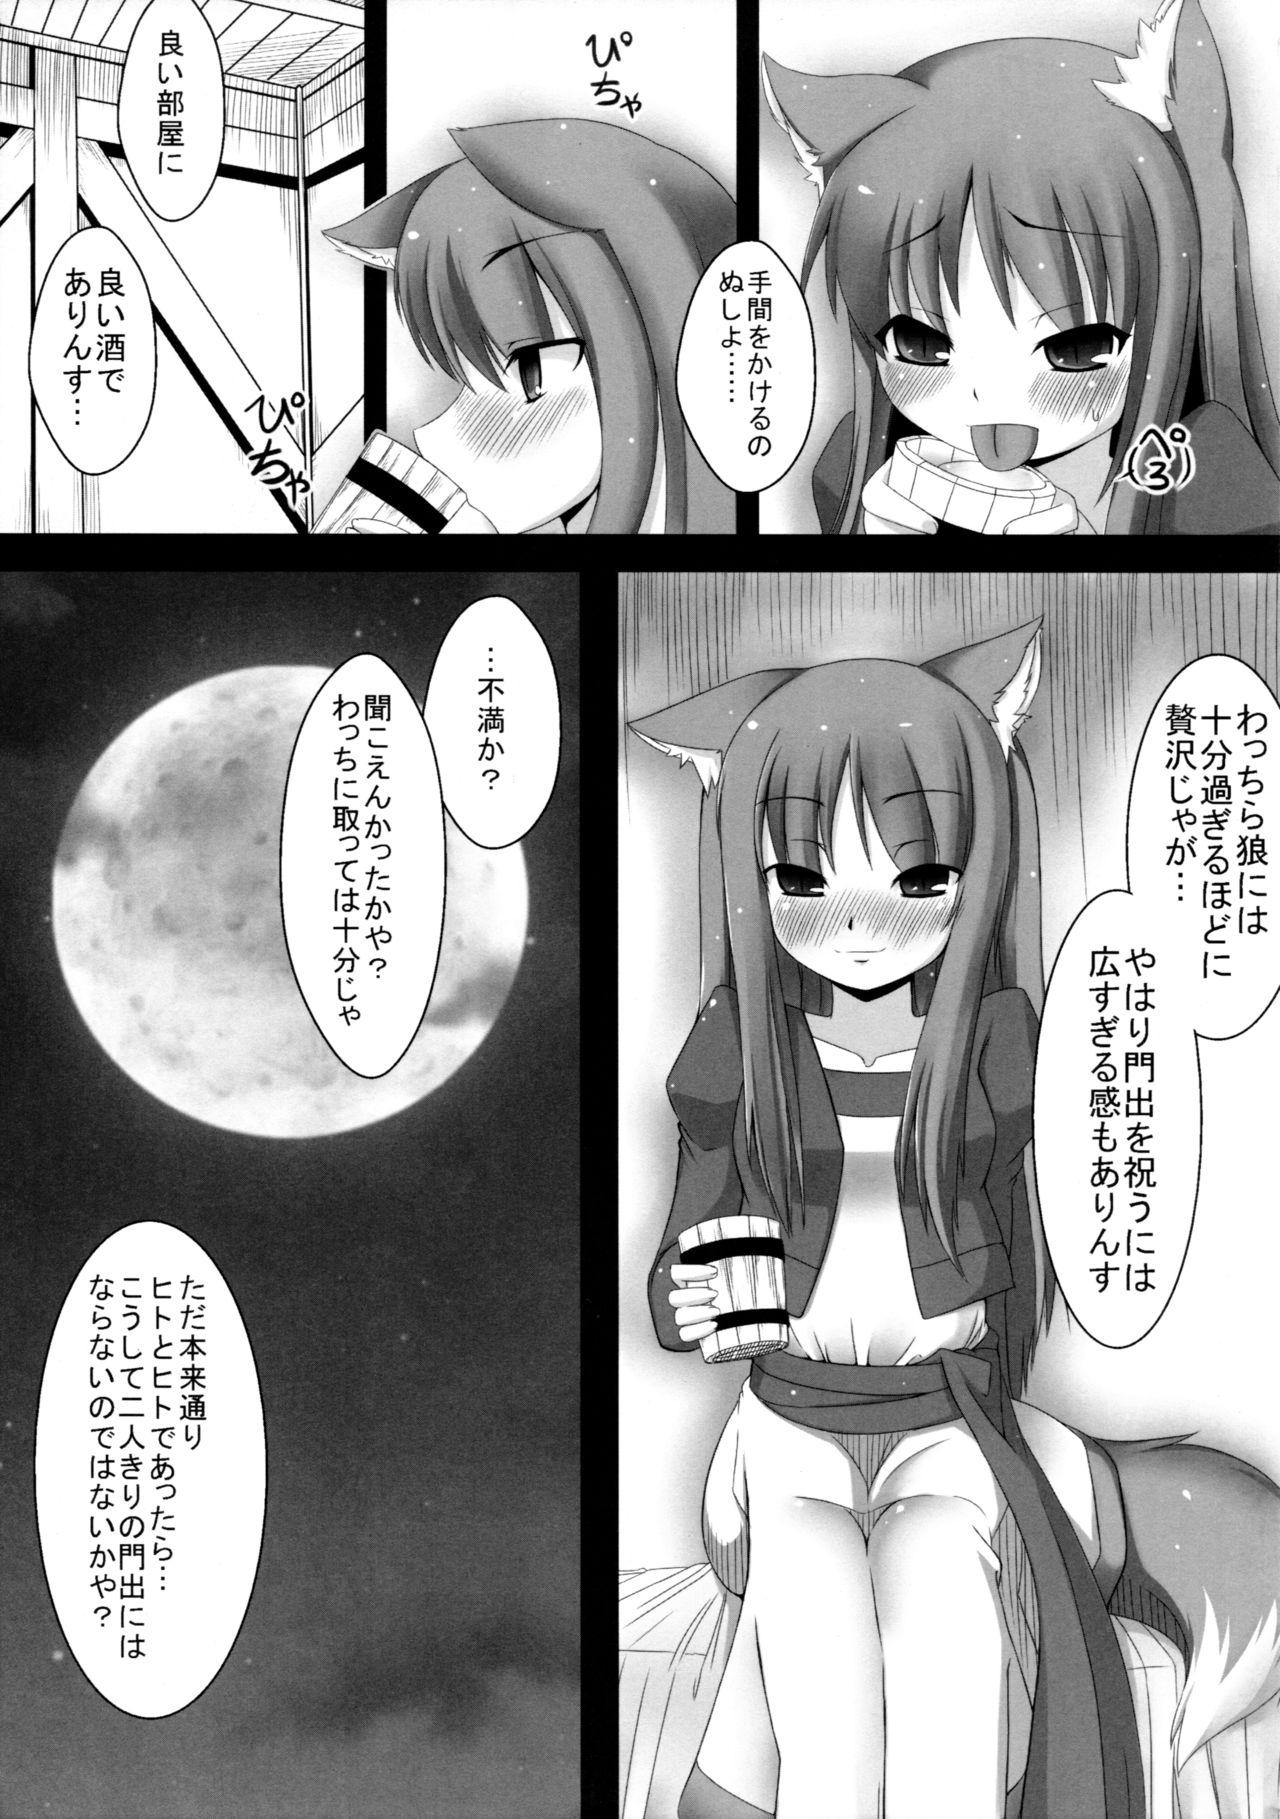 Thylinh Ookami to Yoi no Sakana - Spice and wolf Shaven - Page 6